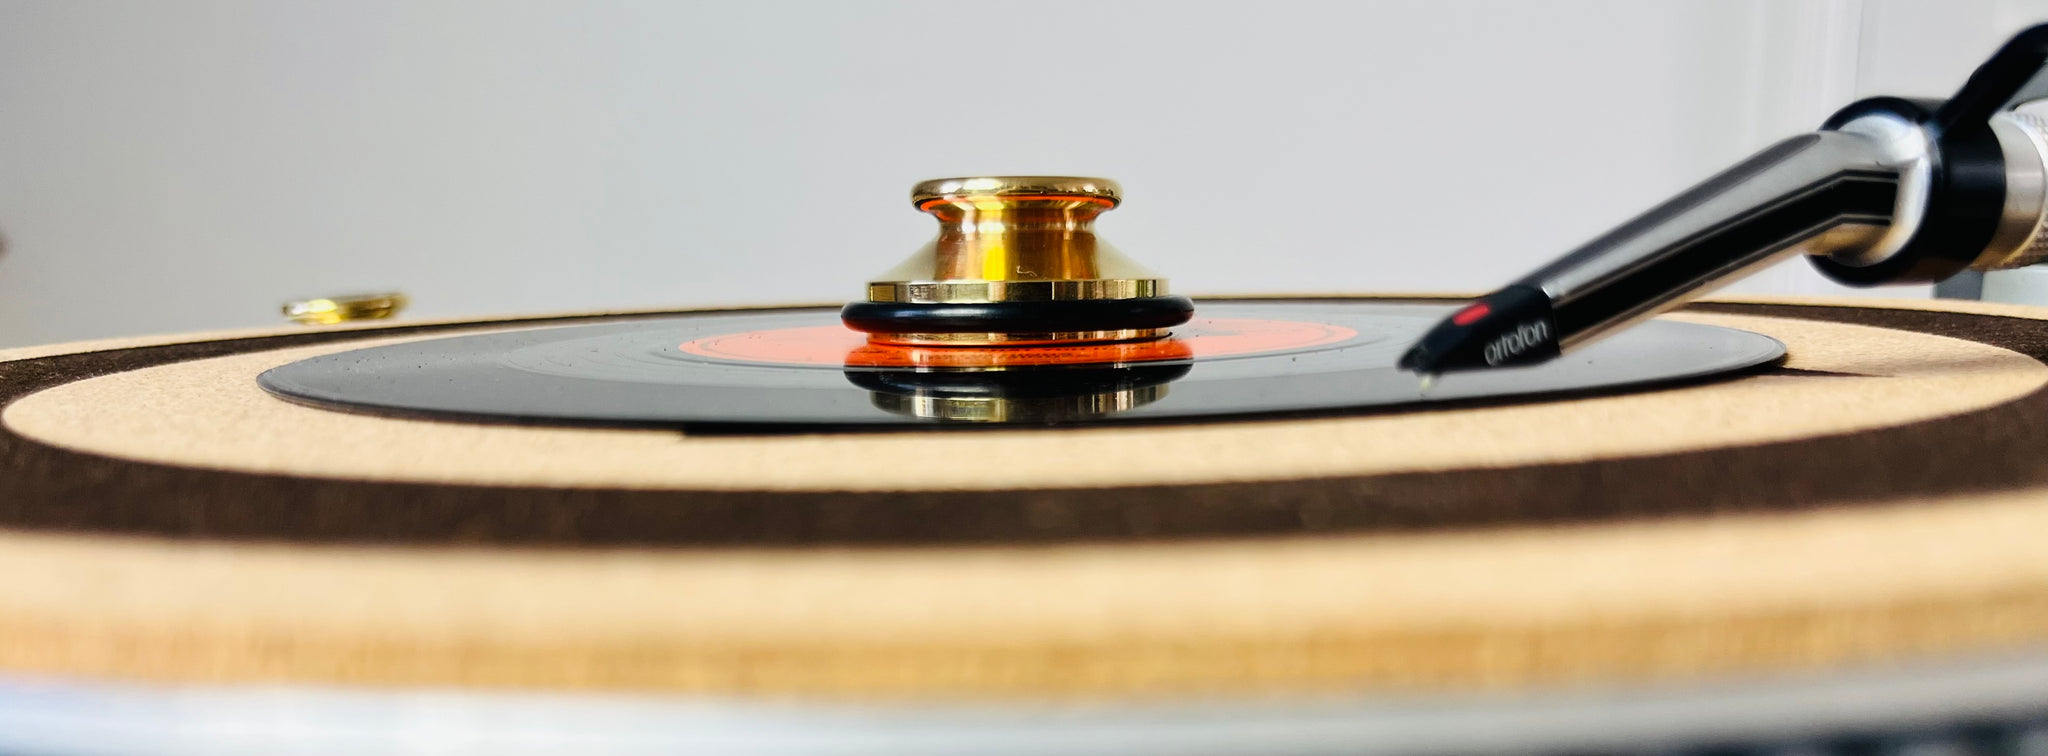 Brass Record Adapter on turntable, side view